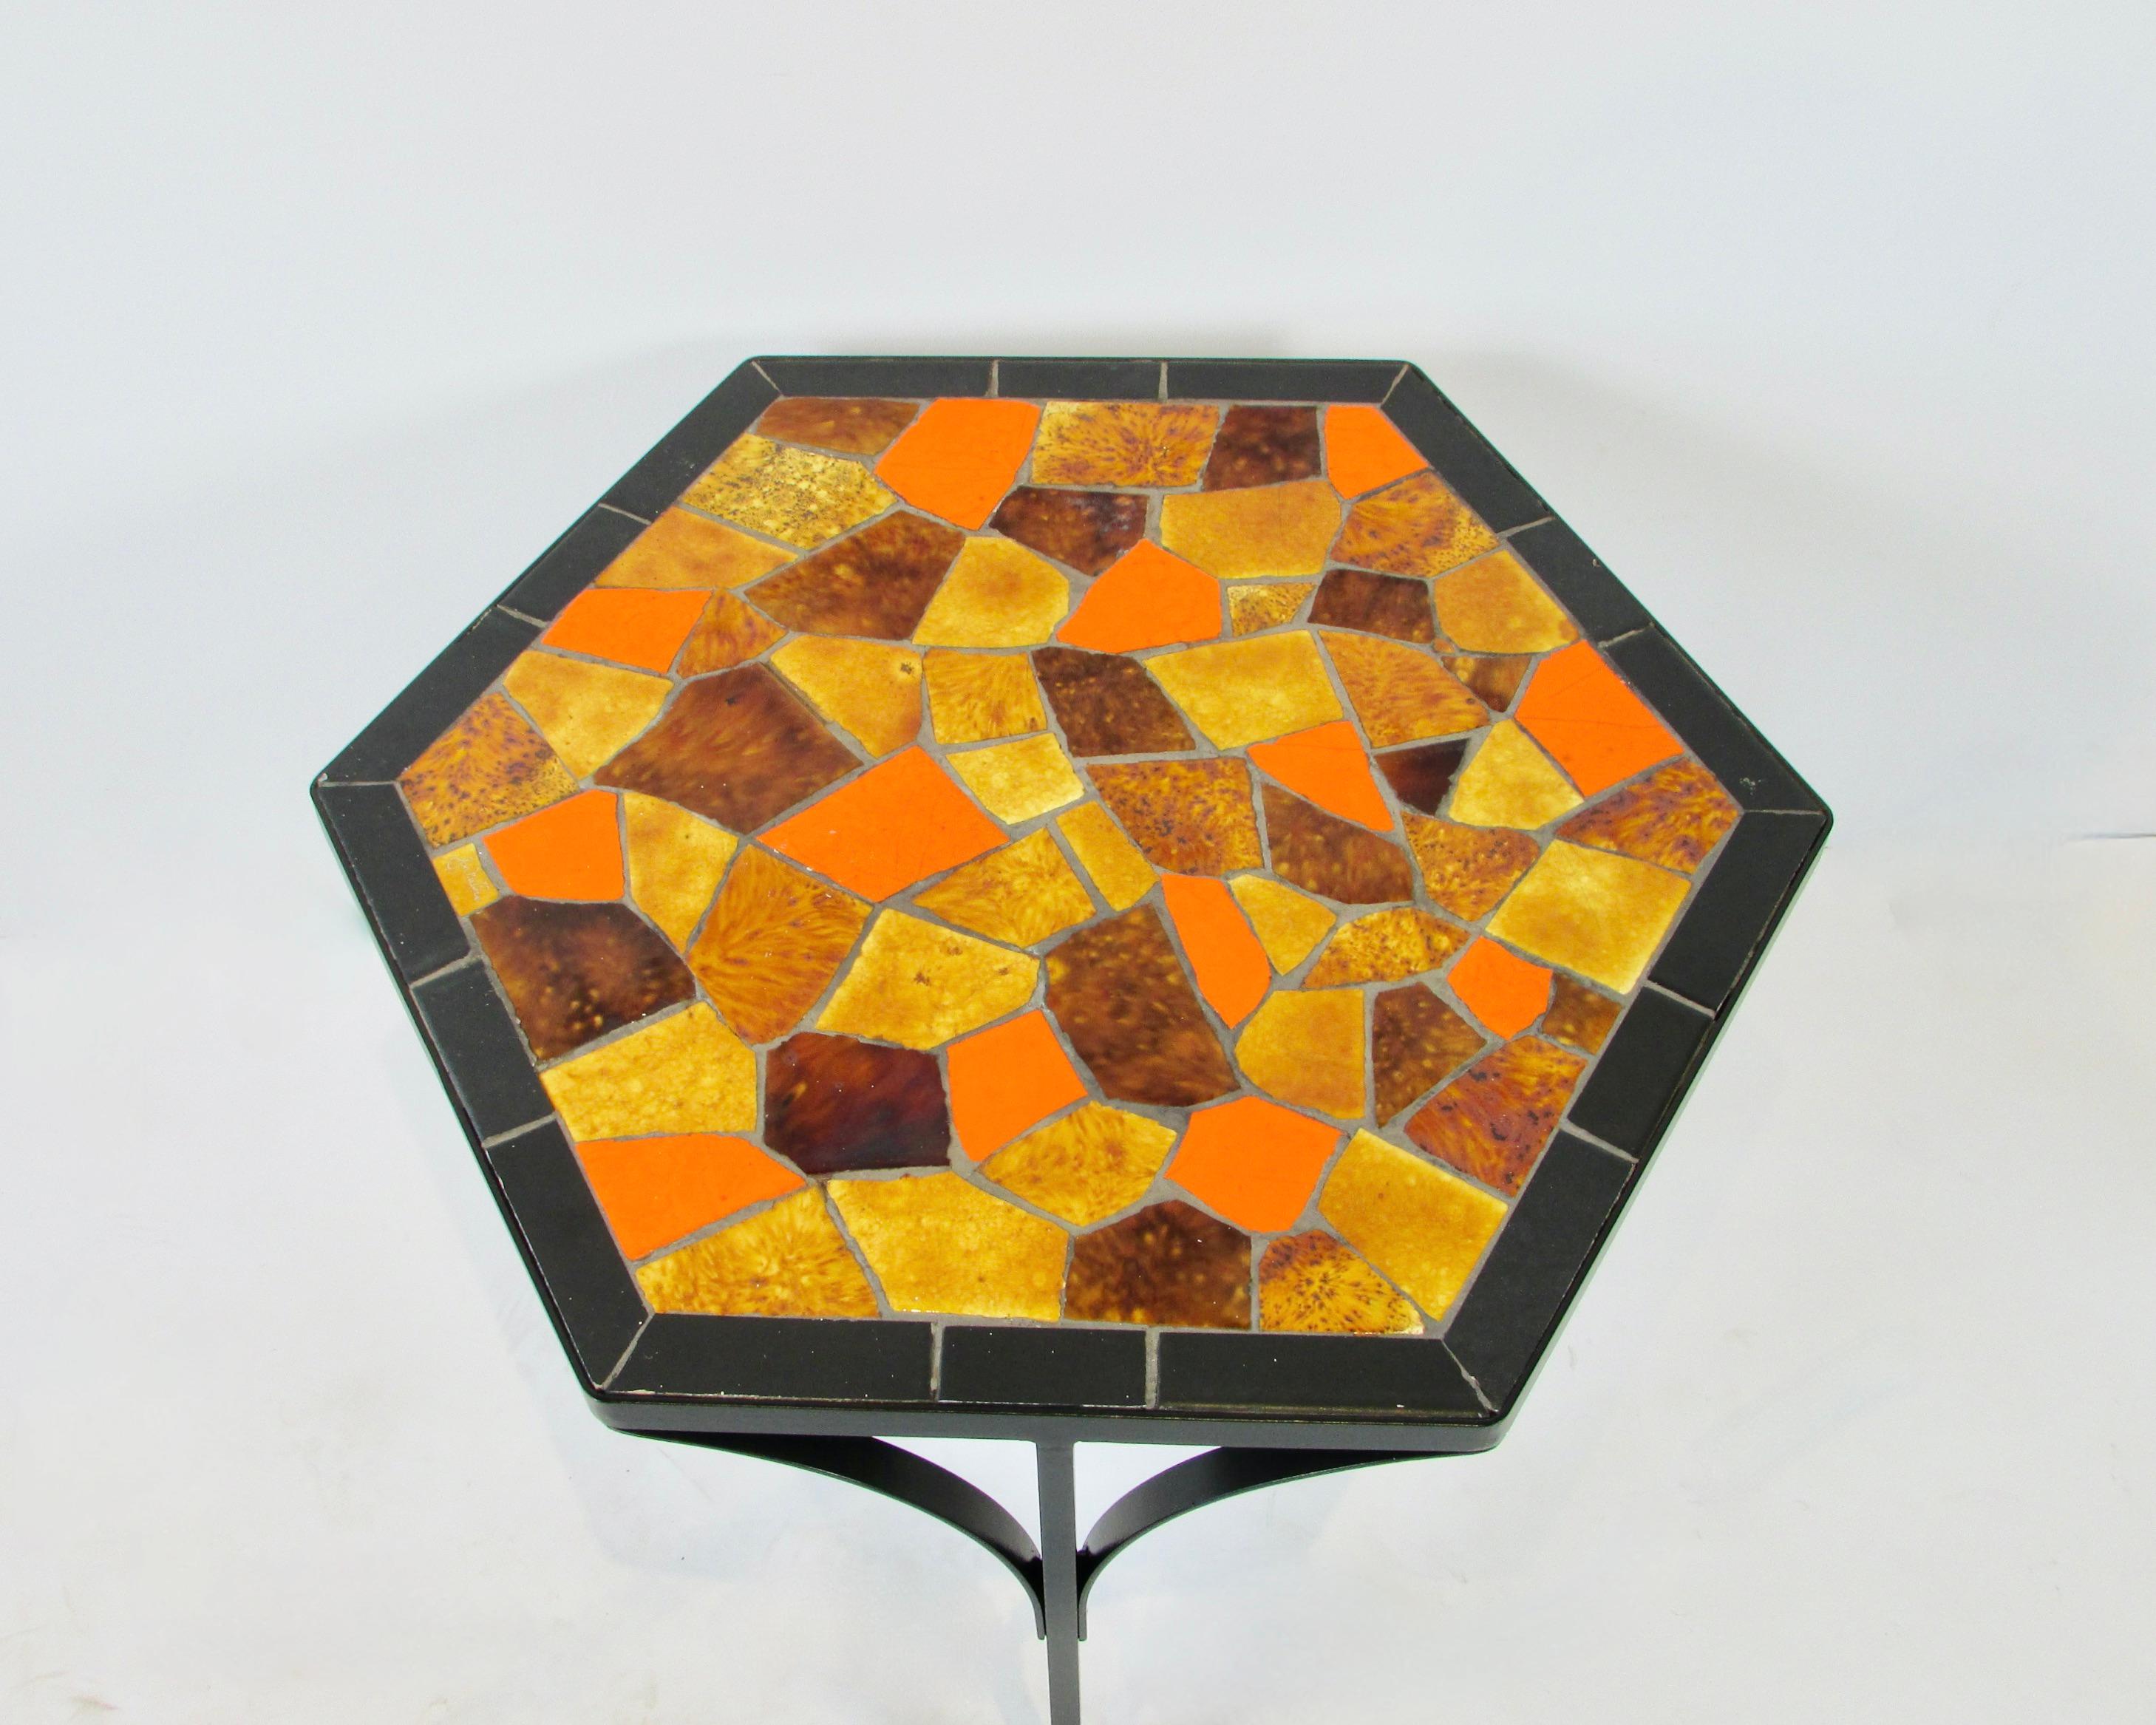 Hand-Crafted Jon Matin graduated Nest of Hexagonal Tile top Tables on Iron Base   For Sale